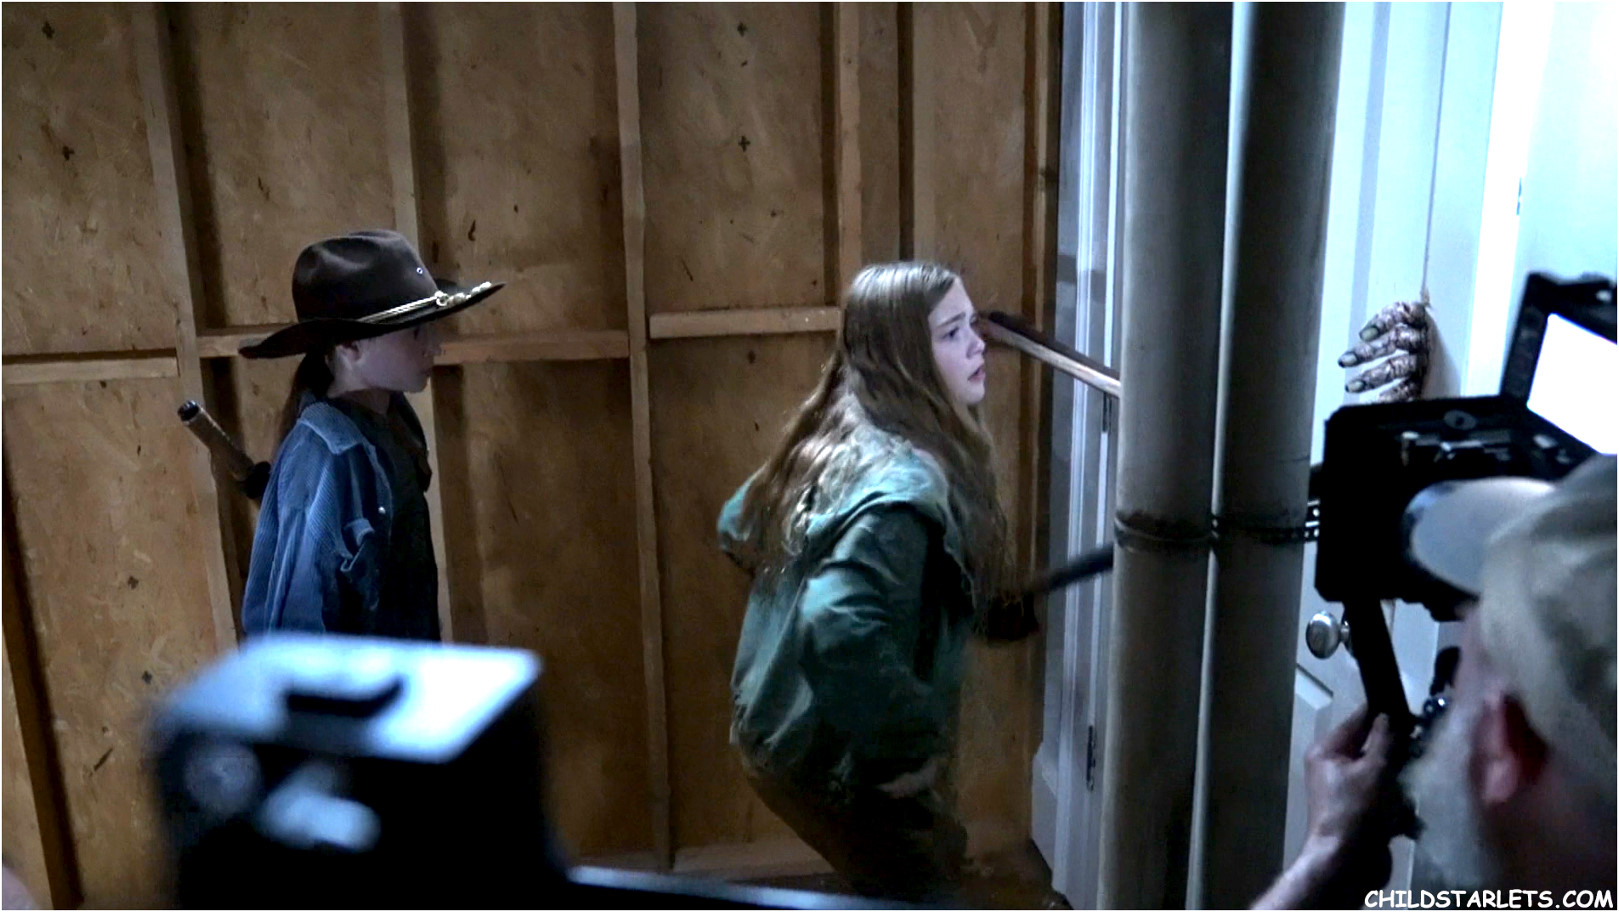 Cailey Fleming / Anabelle Holloway
"The Walking Dead: Season 11" - 2022/HD
Ep 9: "No Other Way"